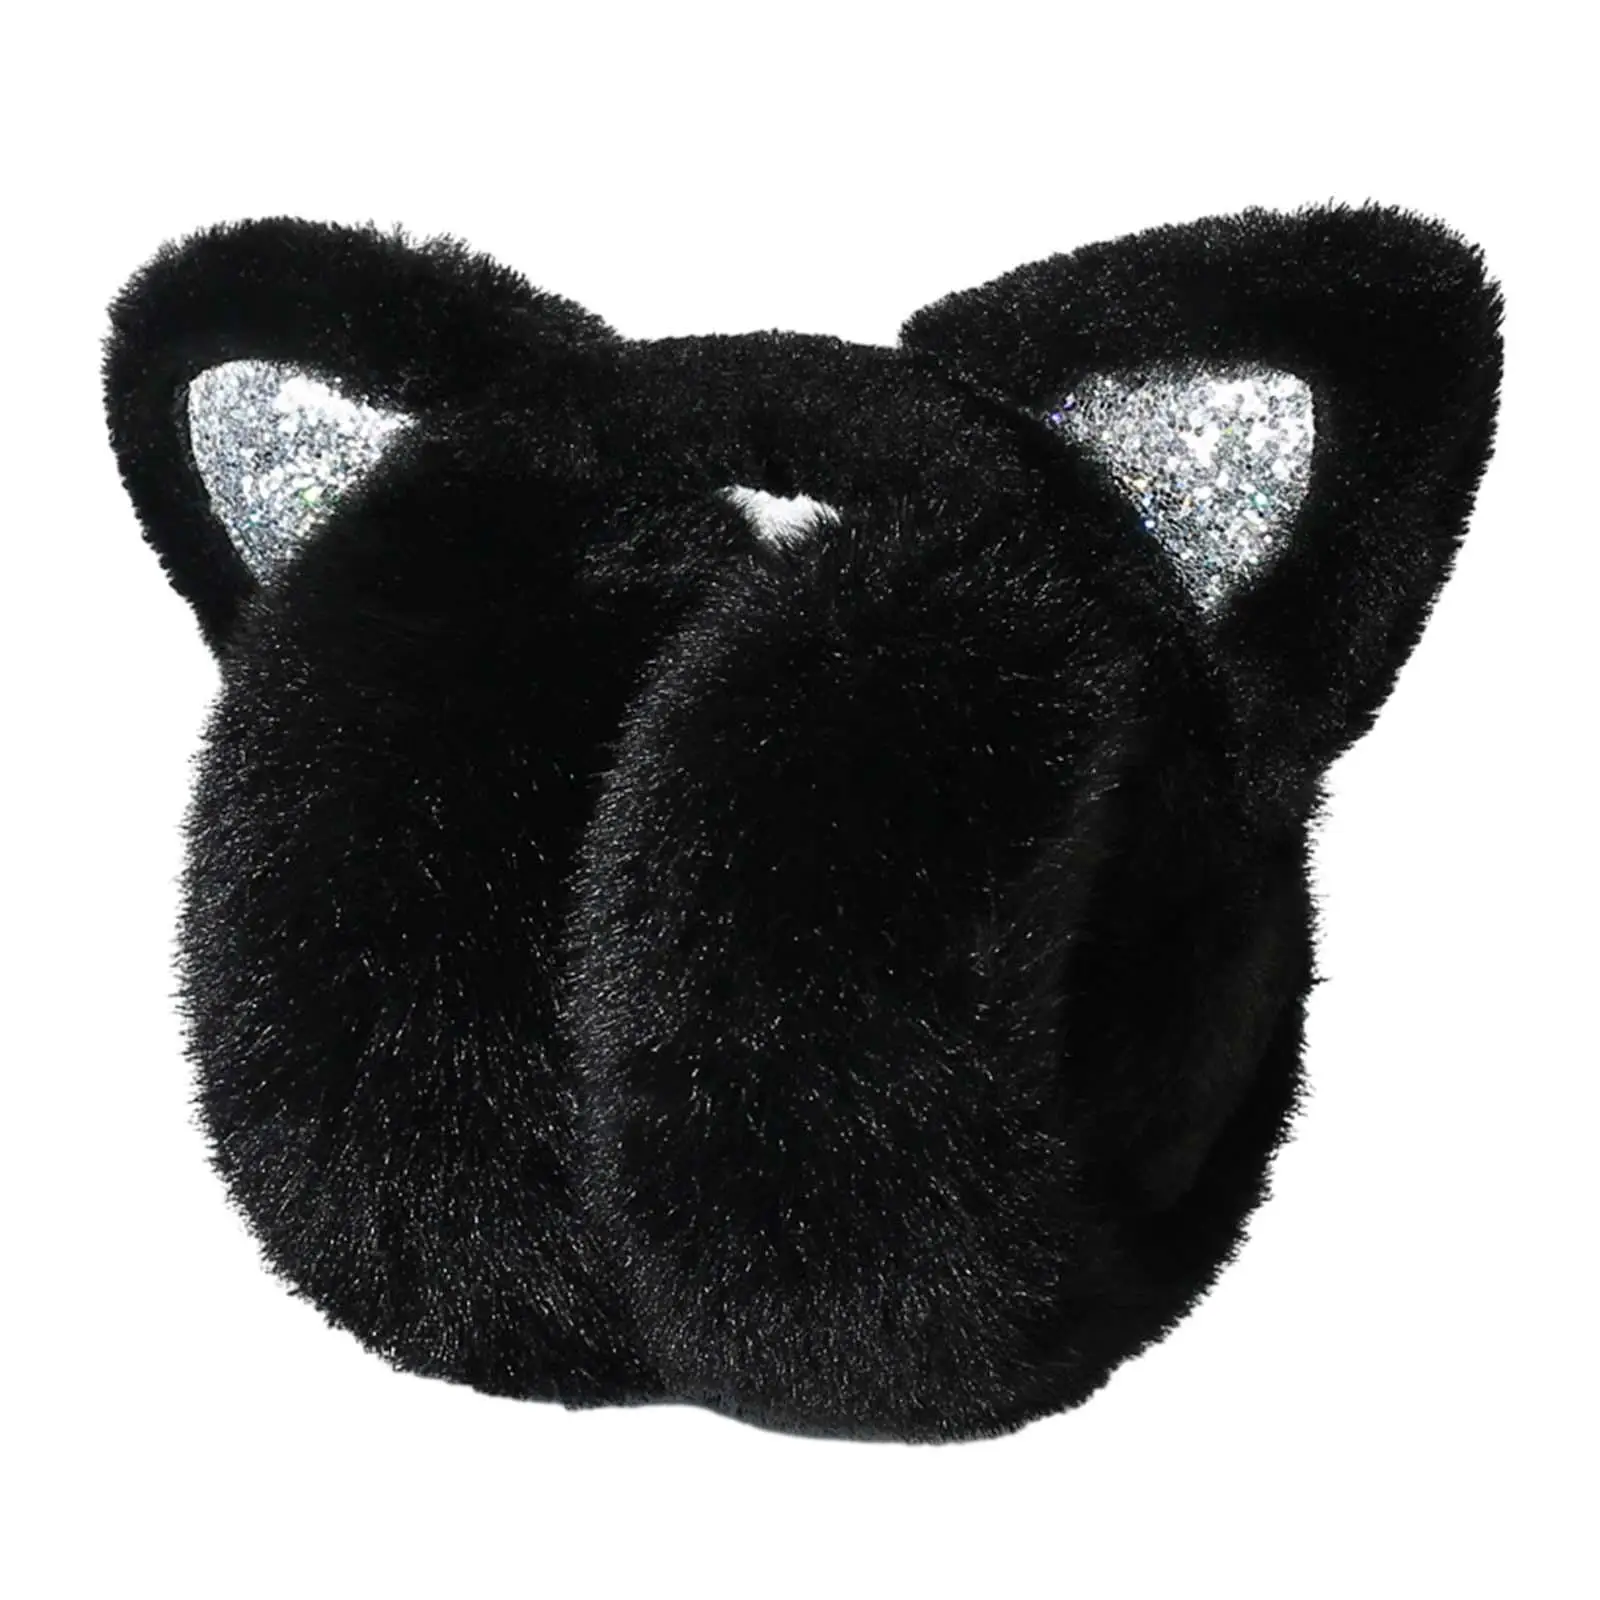 Winter Ear Muffs Ear Warmers Foldable Women Premium Earmuffs Ear Cover for Traveling Skating Skiing Cycling Outdoor